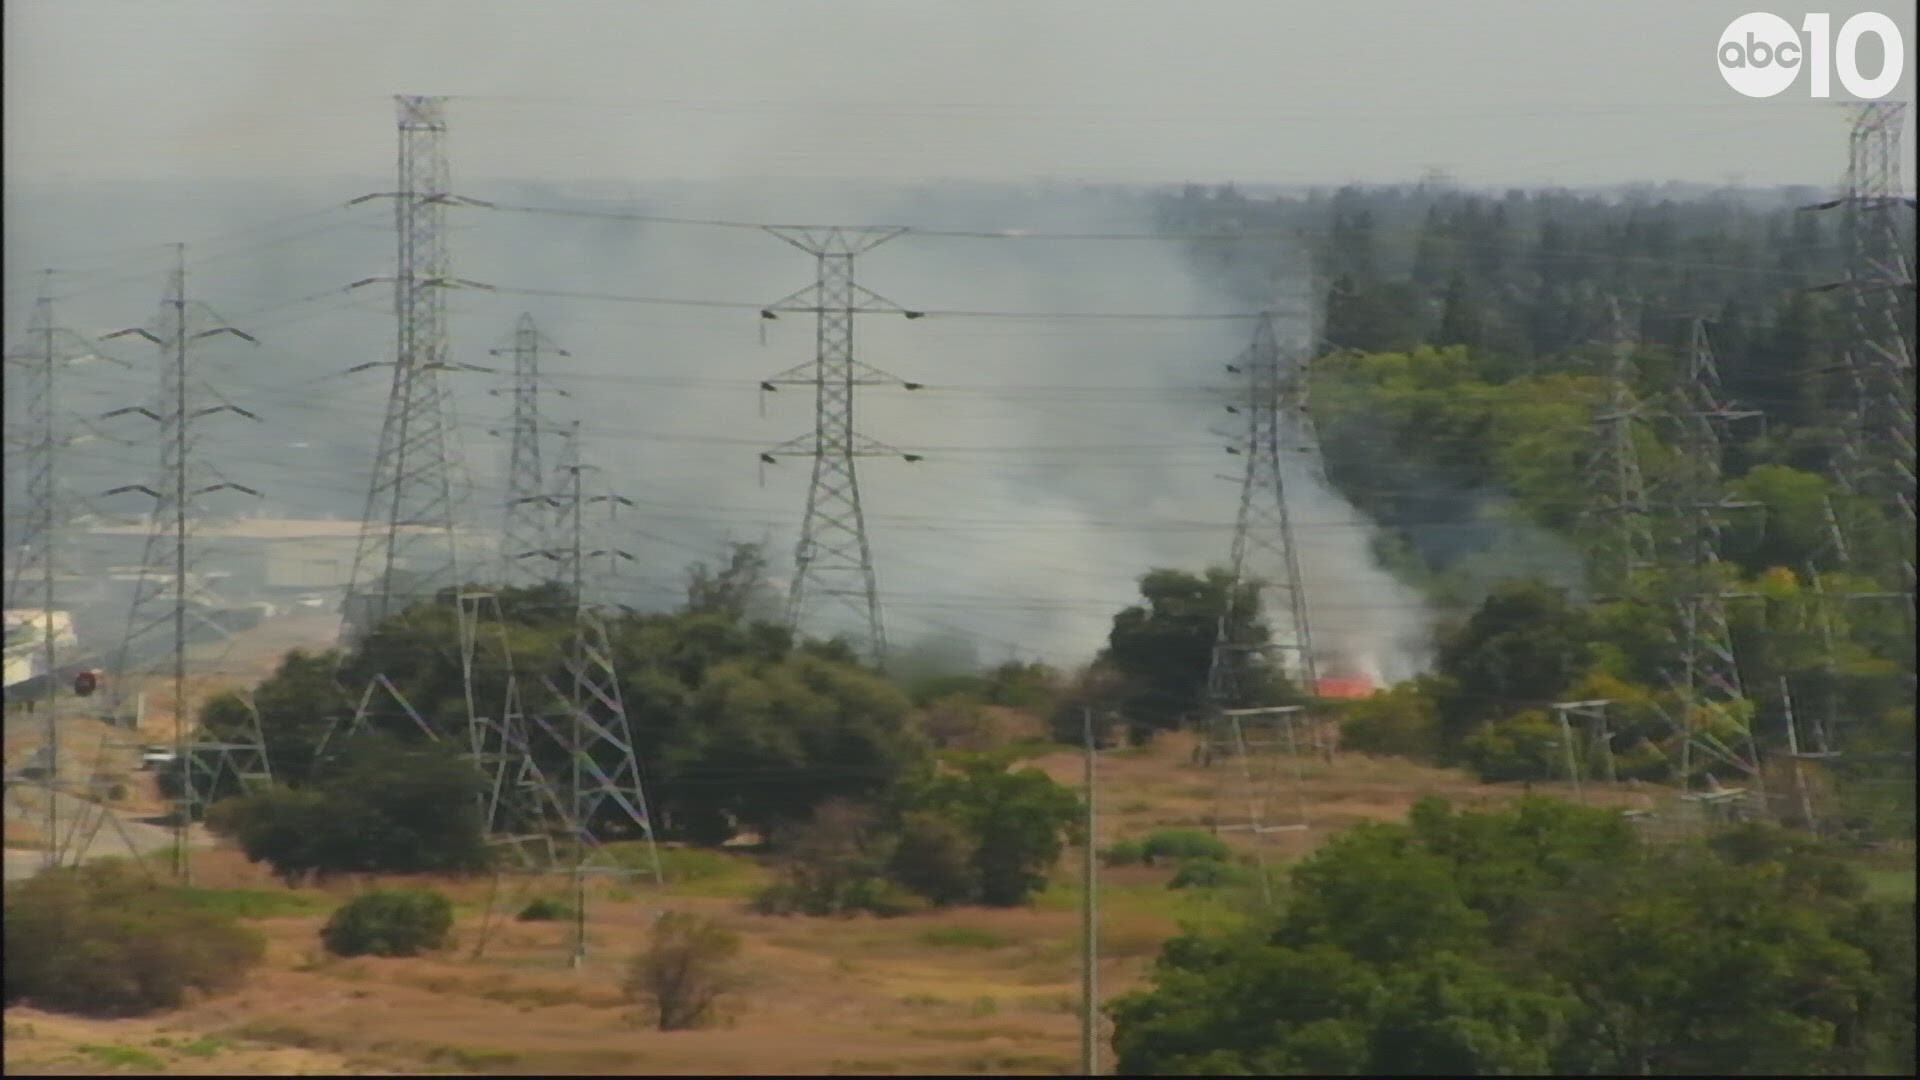 The two alarm grass fire is located along the lower American River Parkway and in a heavy vegetation area.